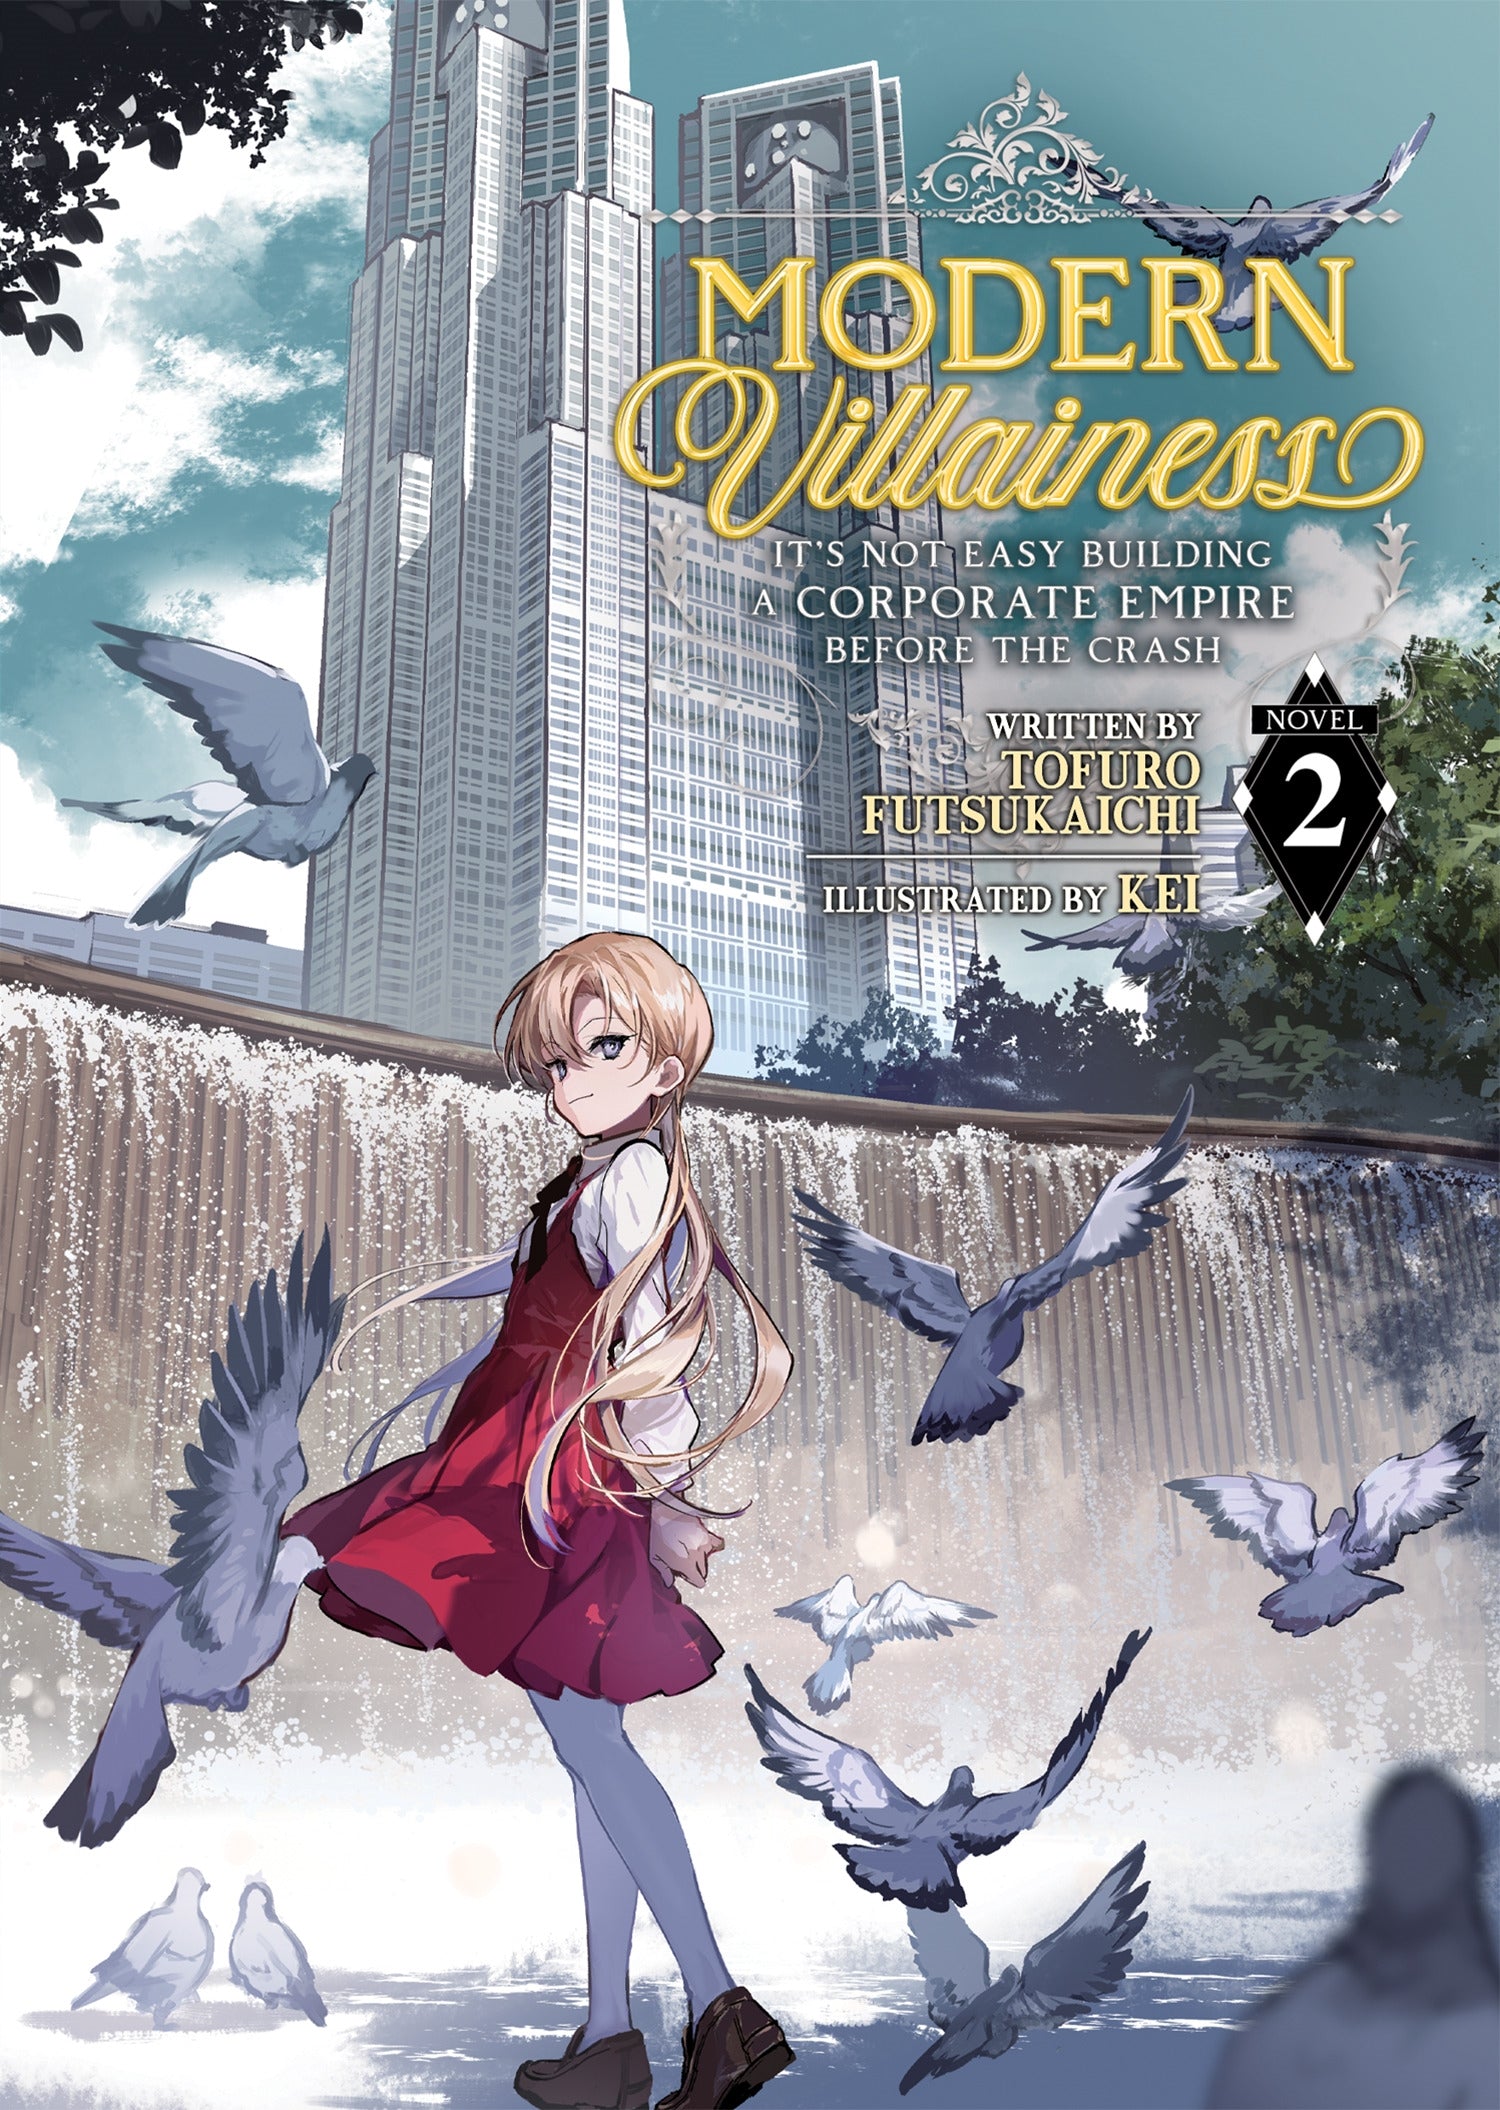 Modern Villainess It's Not Easy Building a Corporate Empire Before the Crash (Light Novel) Vol. 2